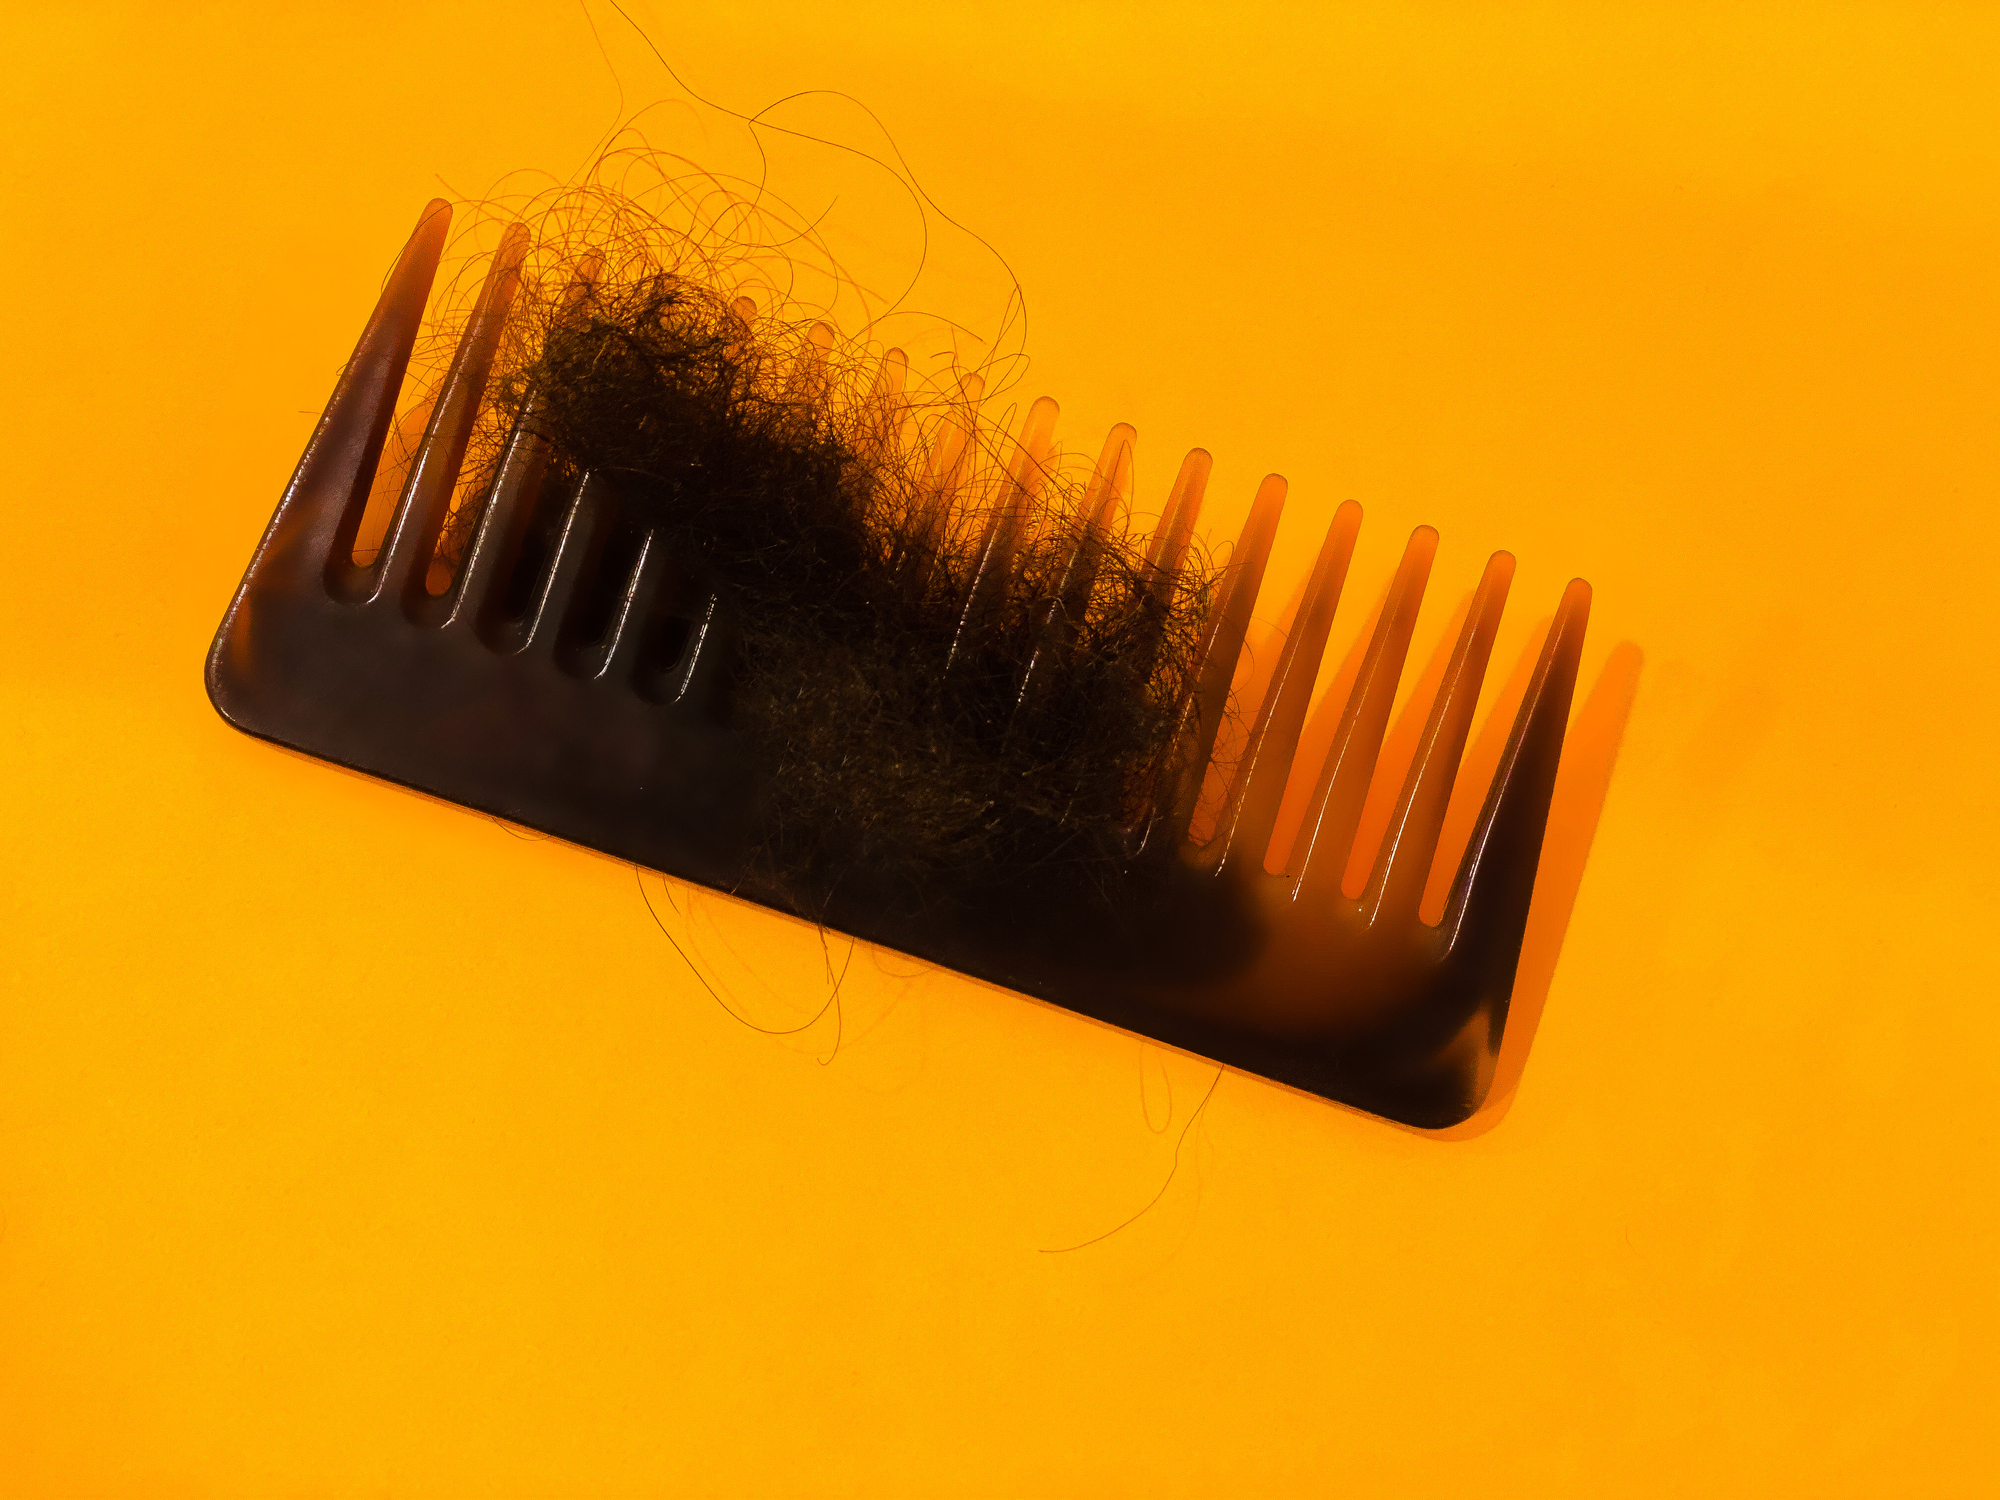 Ask a Curl Expert: “Why is My Hair Falling Out So Much?”